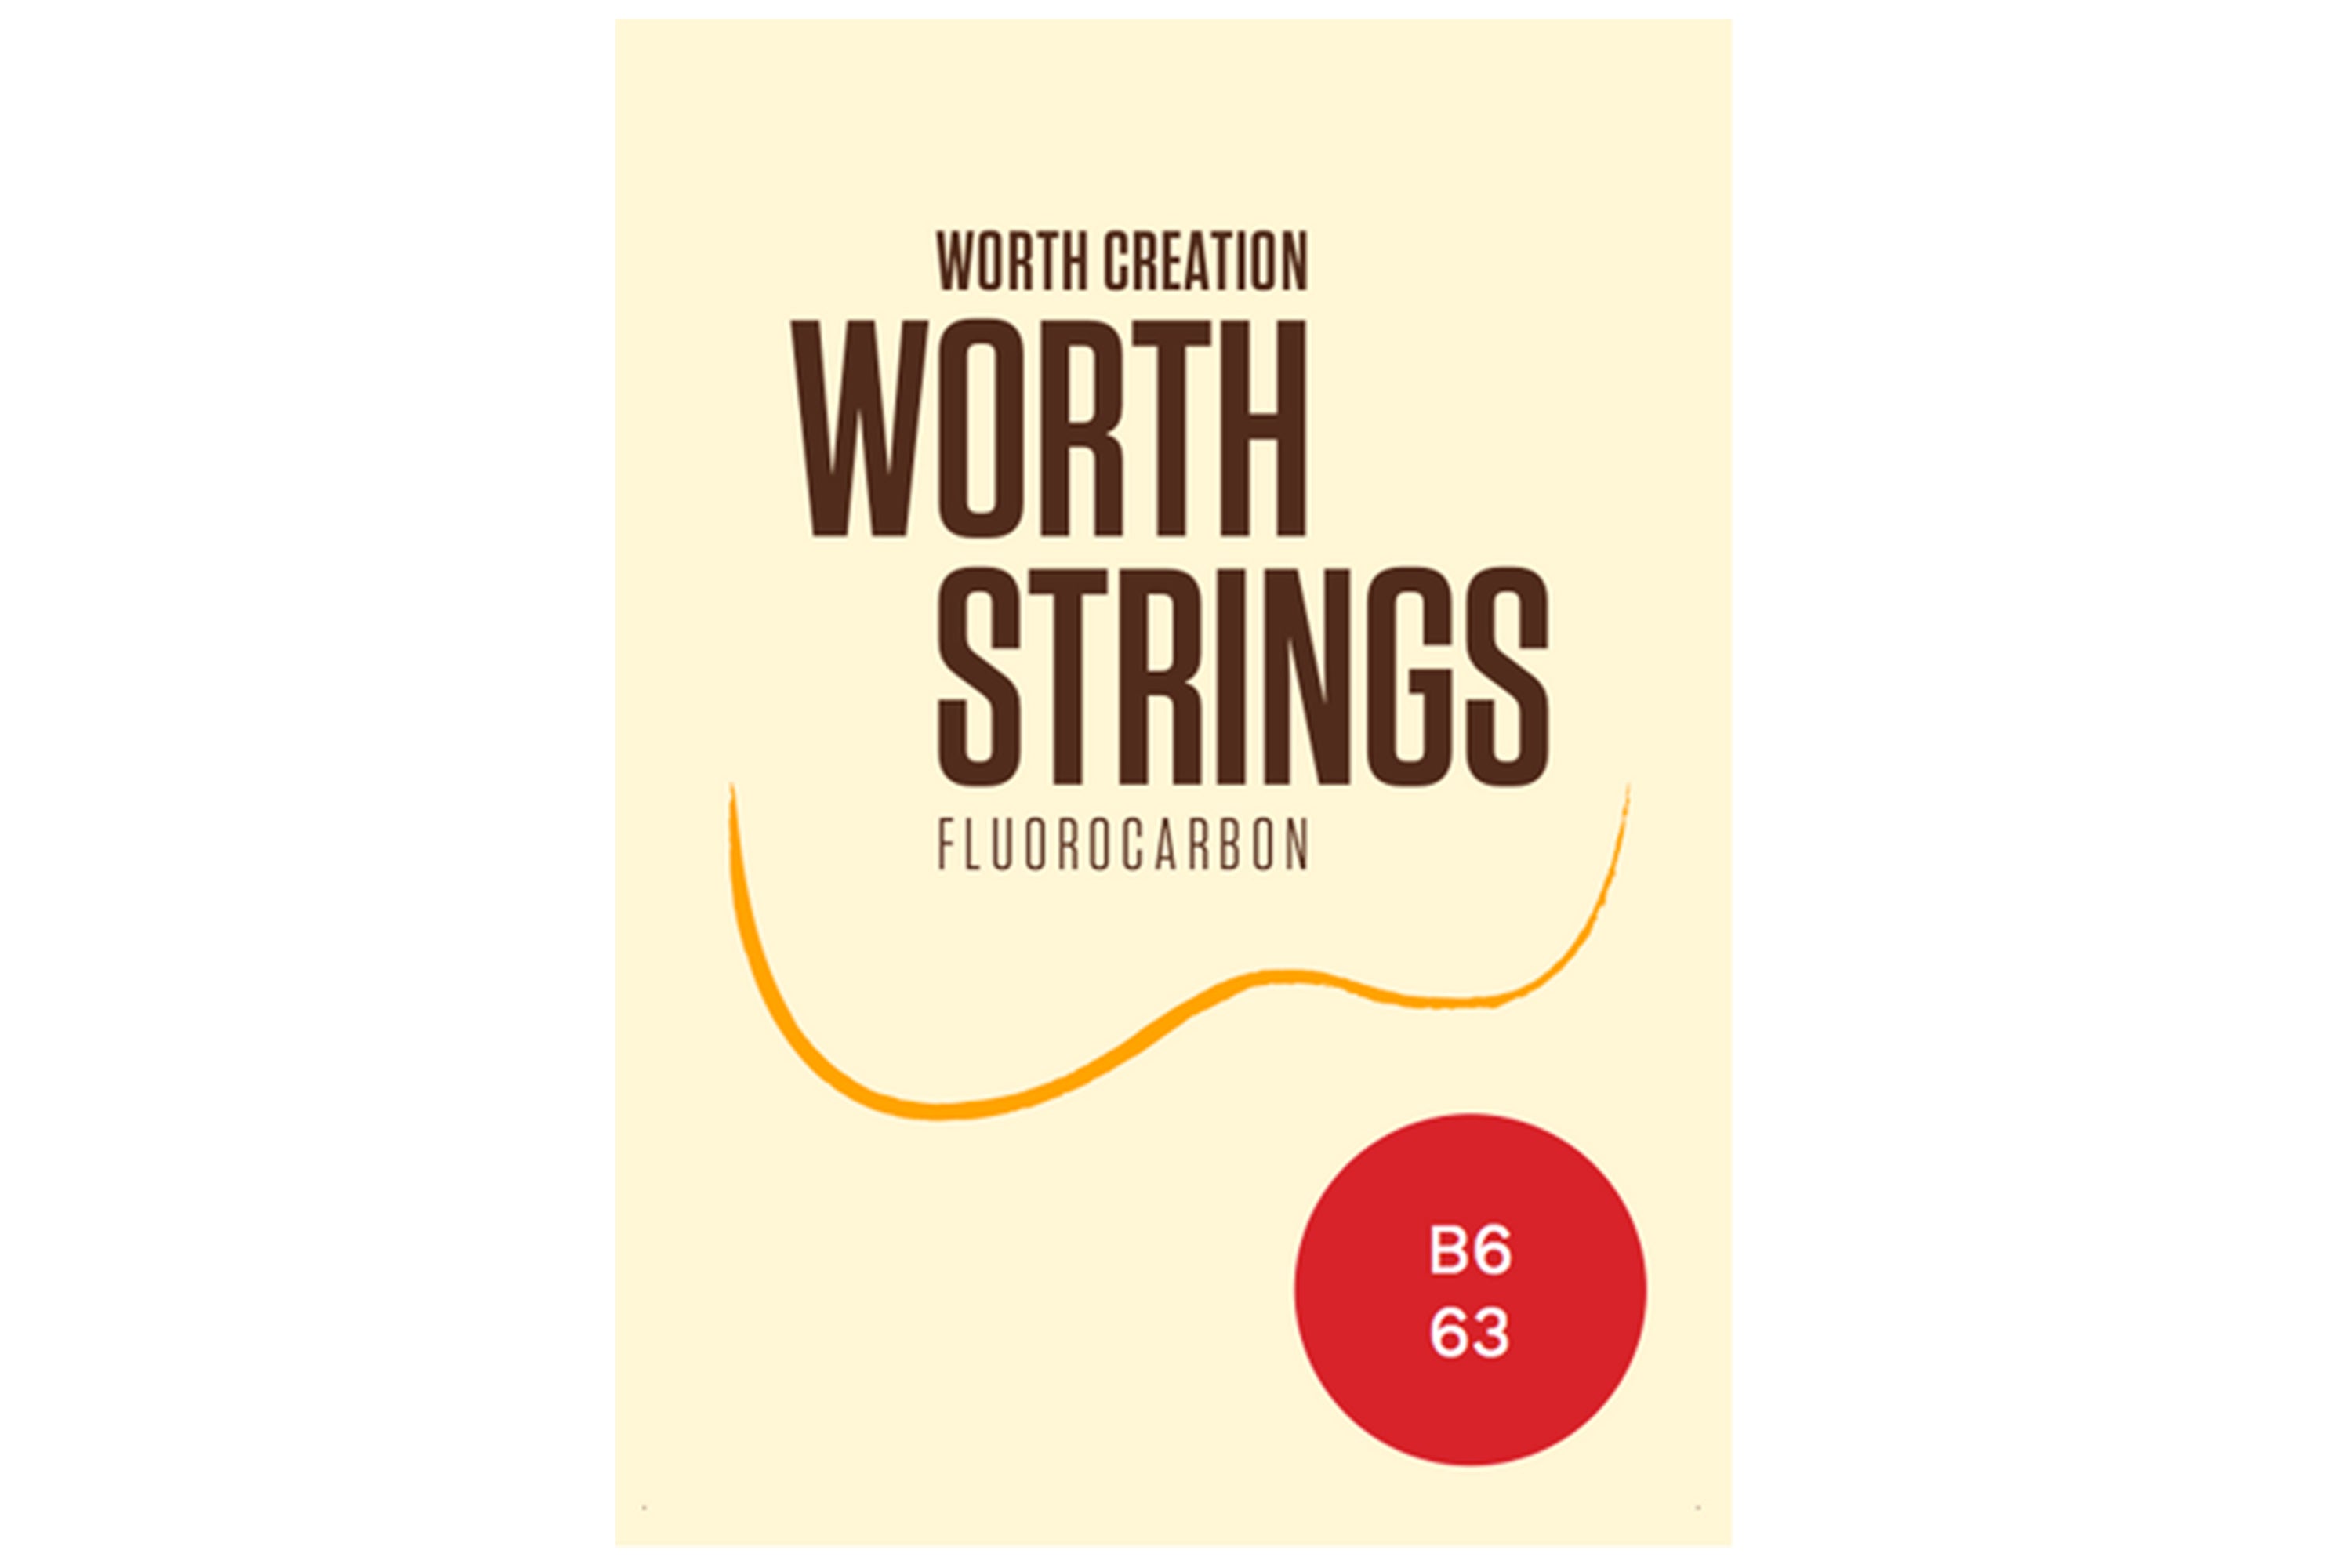 Worth Brown Fluorocarbon 6 String Tenor Ukulele Strings B6-63 inch (G, C, c, E, a, A) Enough For 2 Sets